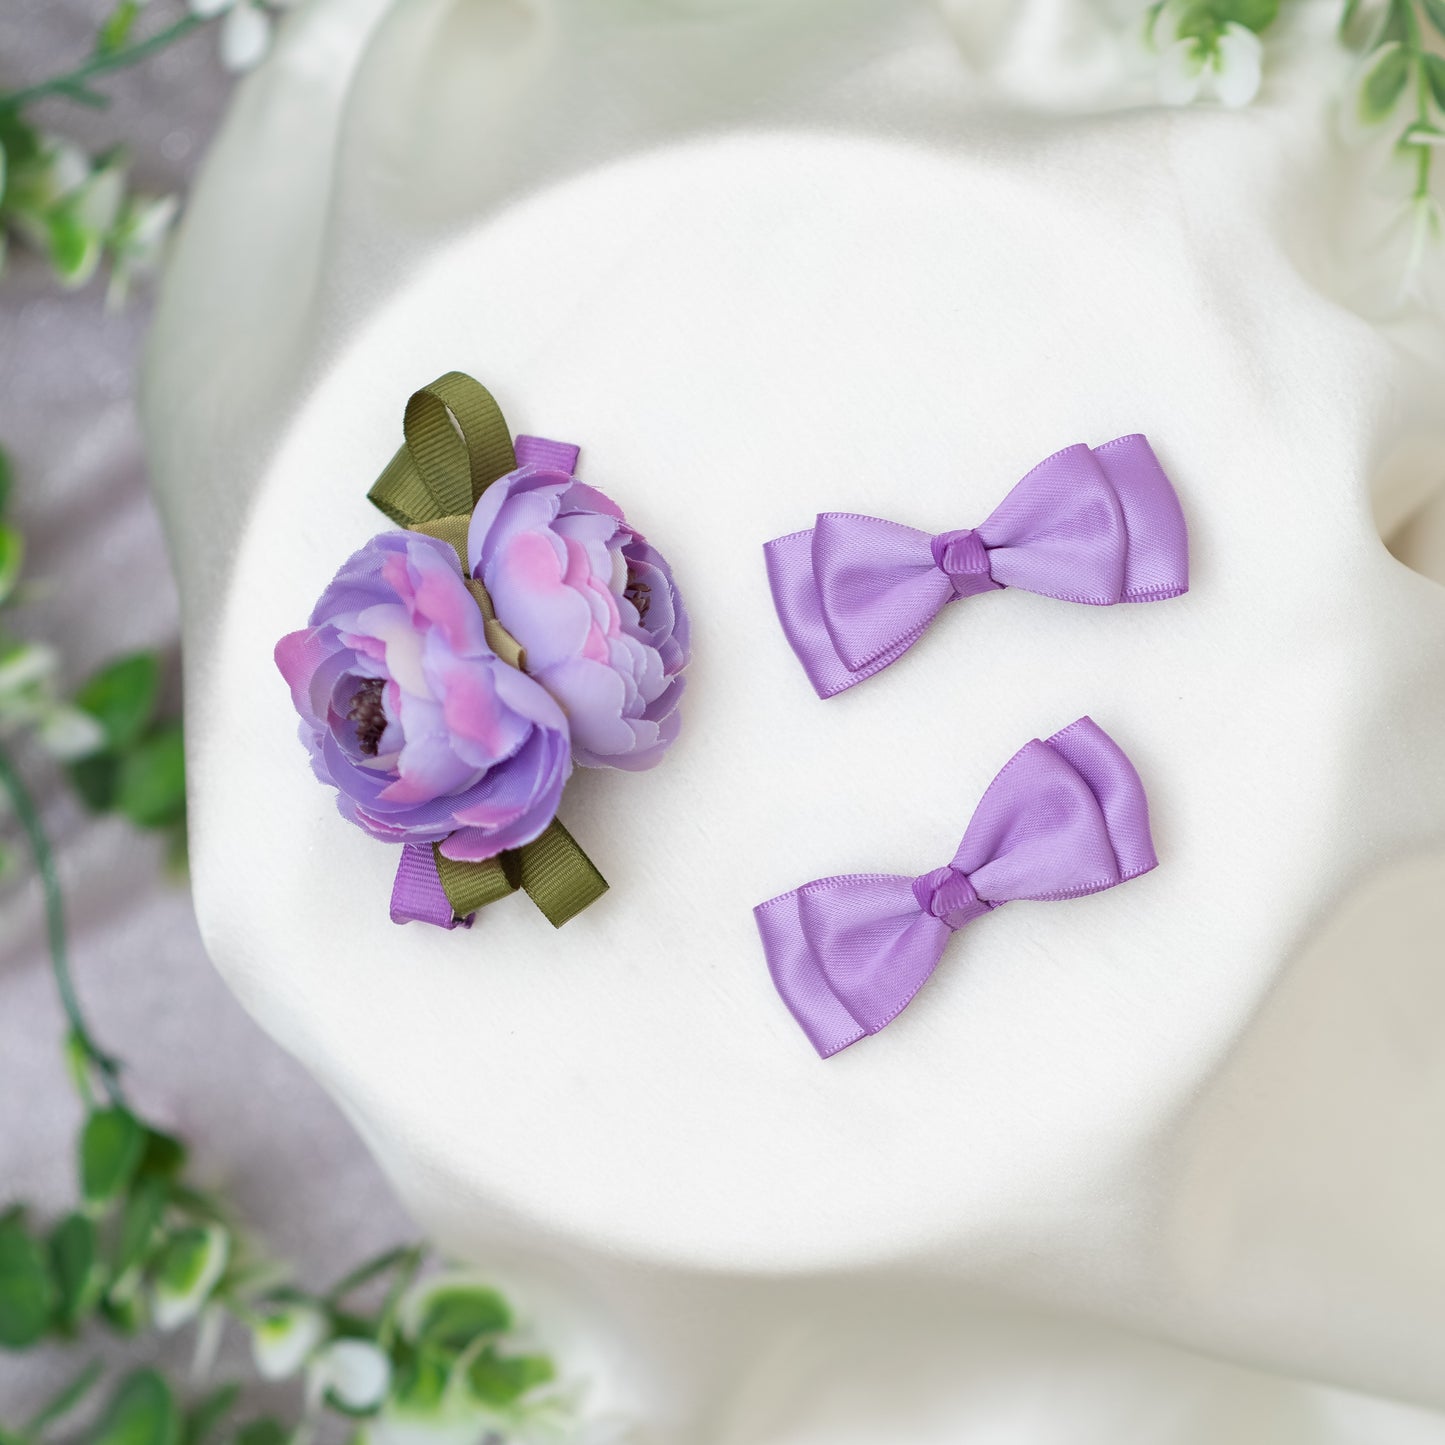 Decorative flower ornamented on alligator clip along with shiny satin double bow alligator clips - Purple (Set of 1 pair and 1 single clip - 3 quantity)